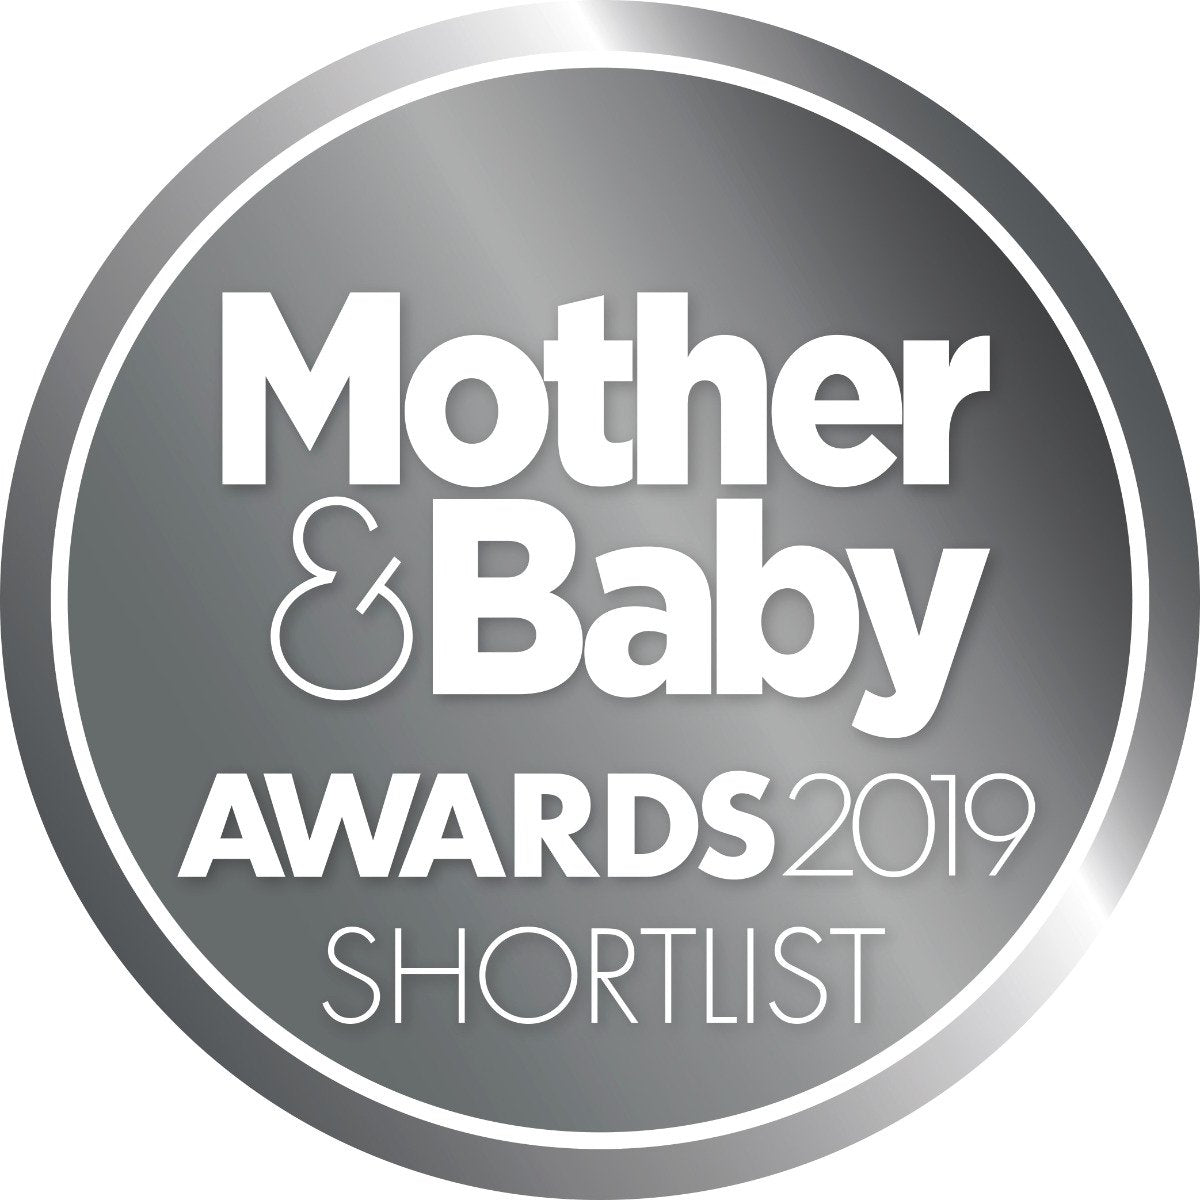 We've Been Shortlisted For Our Teething Baby Toothpaste! | Mother & Baby Awards